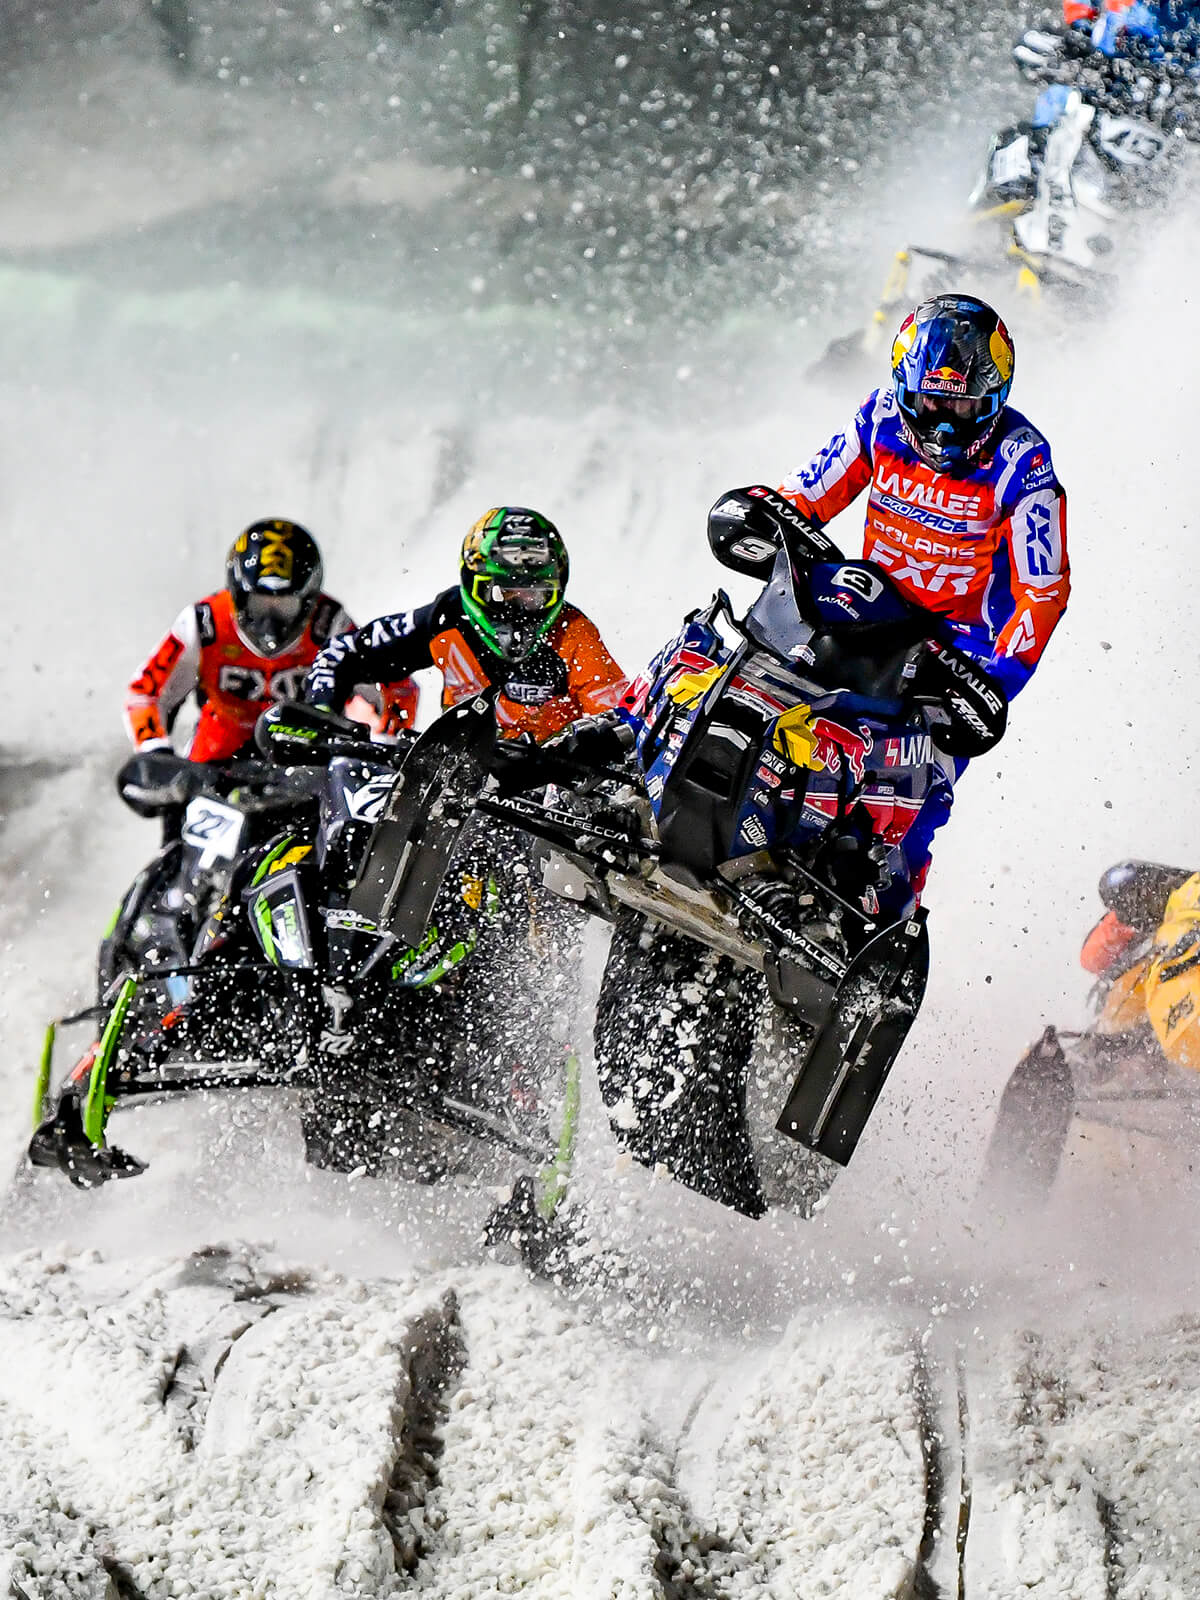 Group of pro Snocross racers at Amsoil ISOC Snocross race